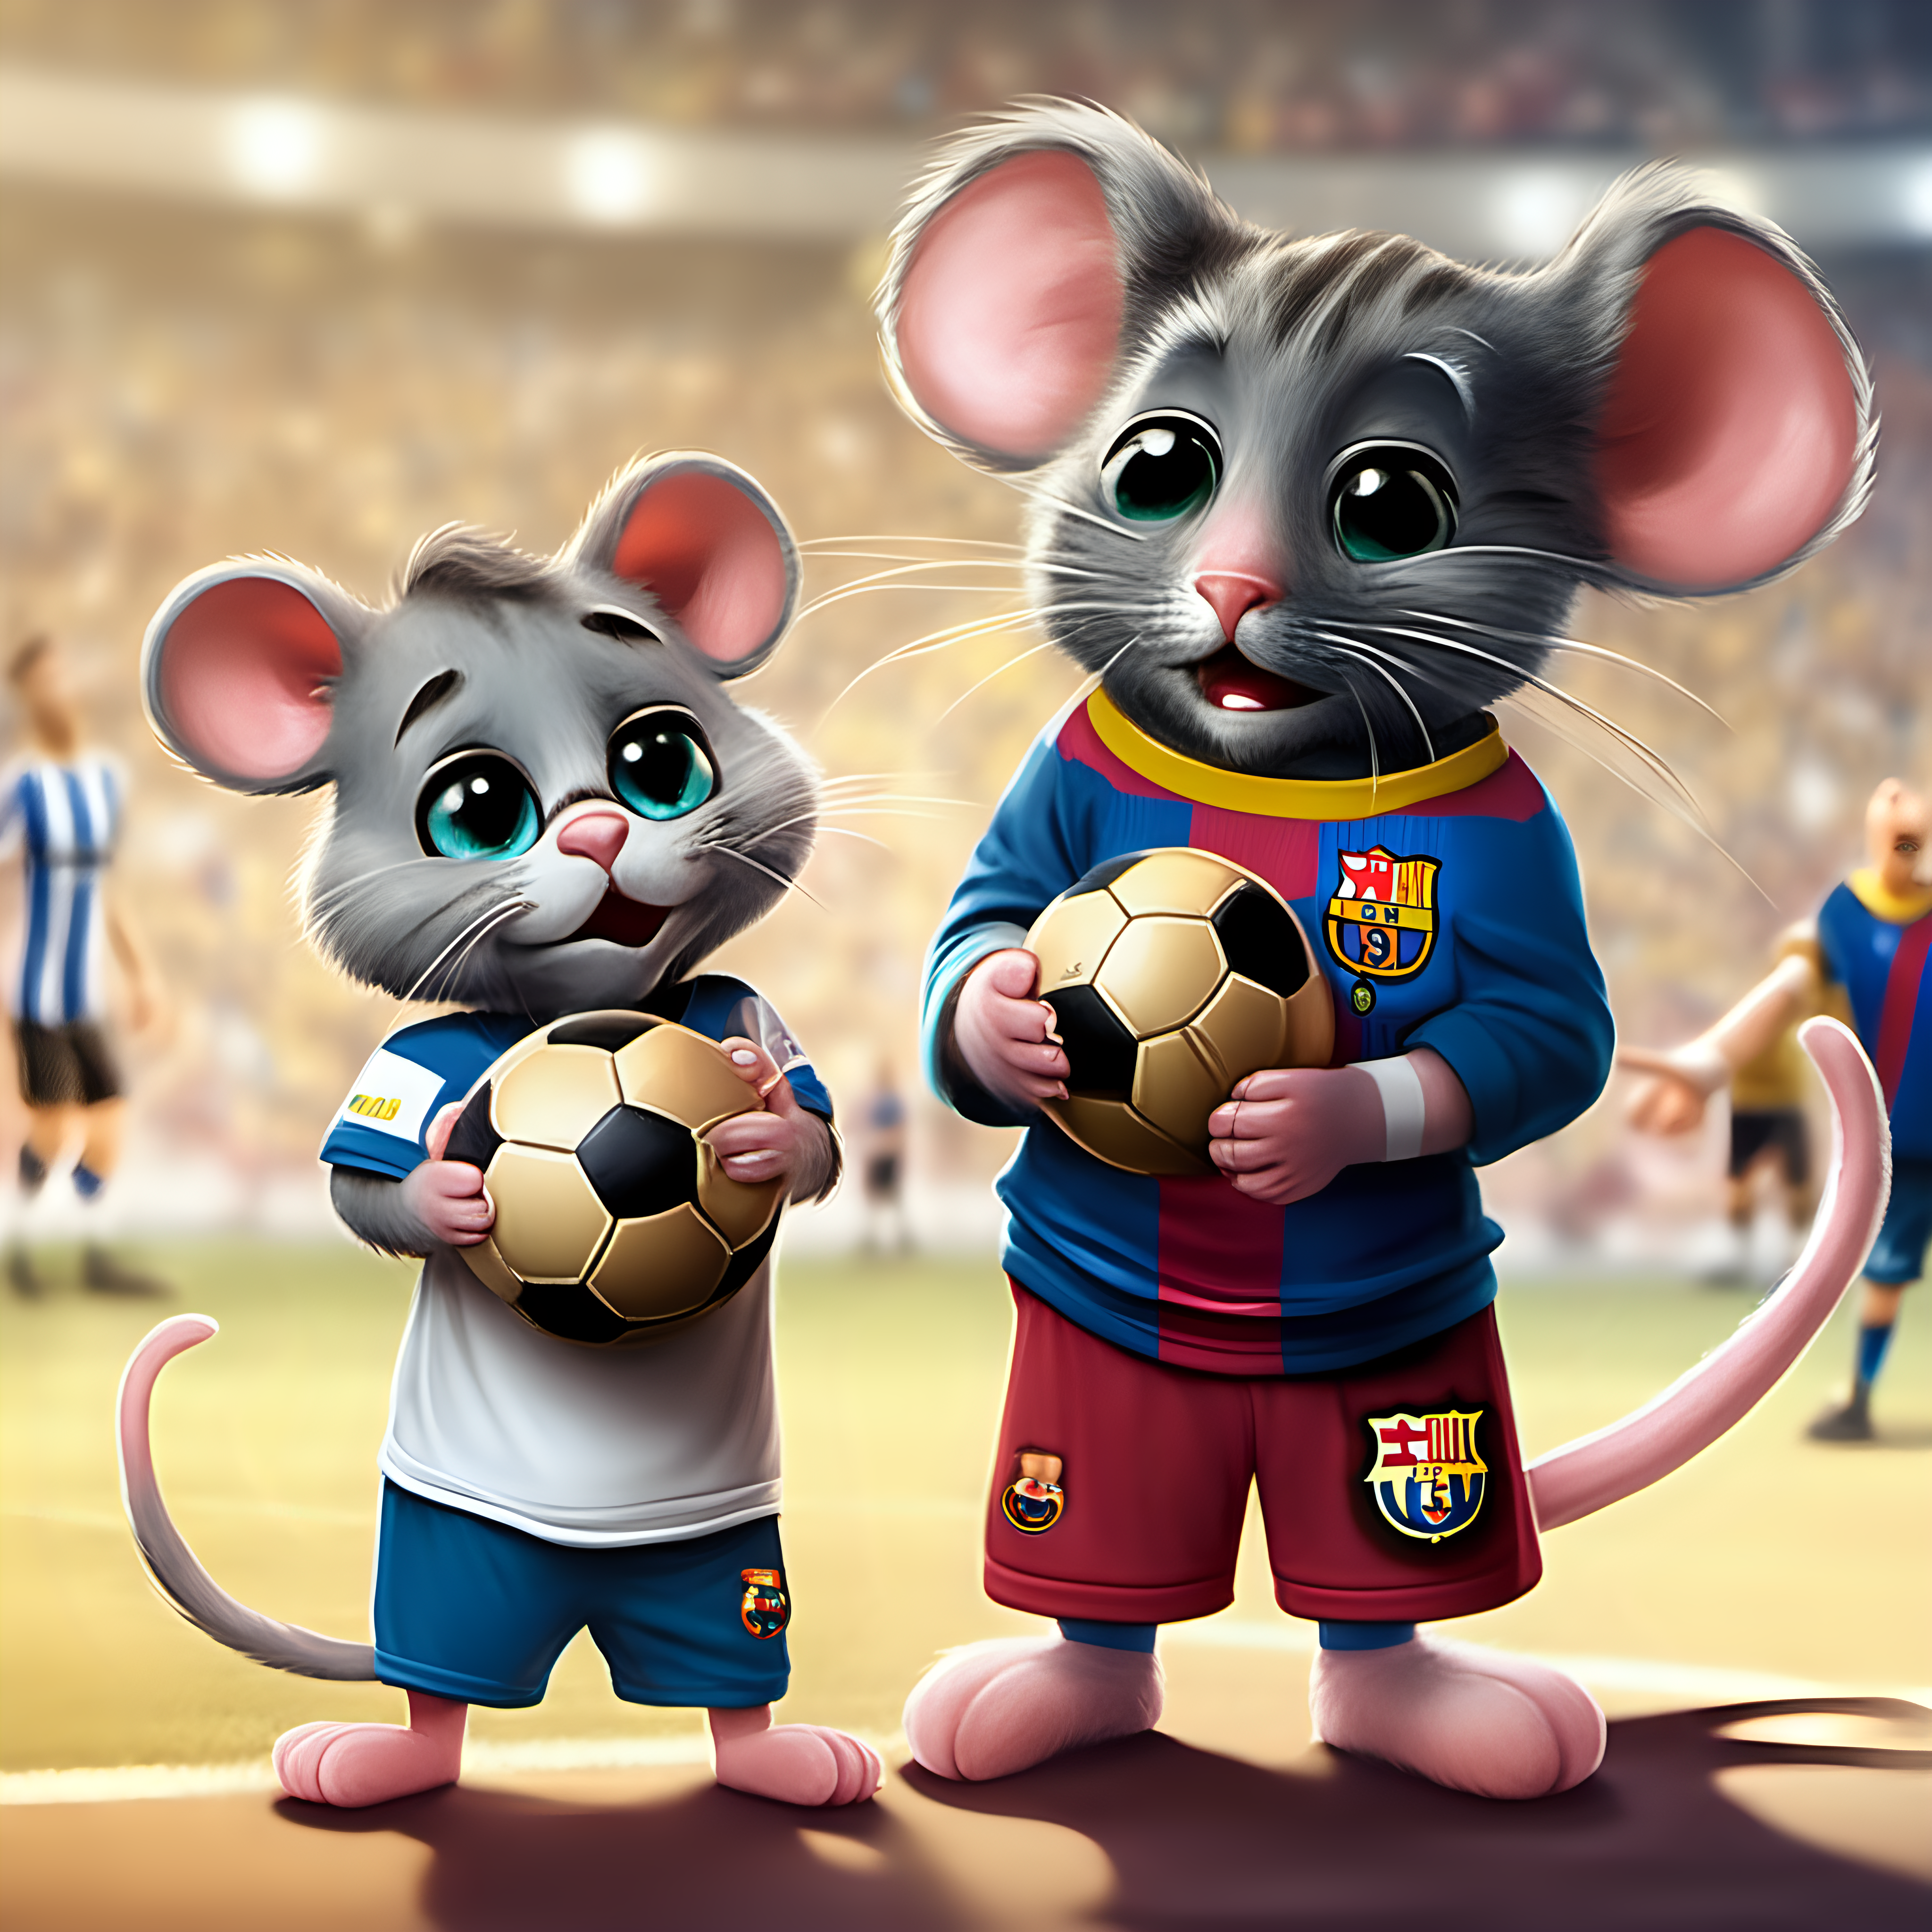 Mouse dressed as a footballer from FC Barcelona